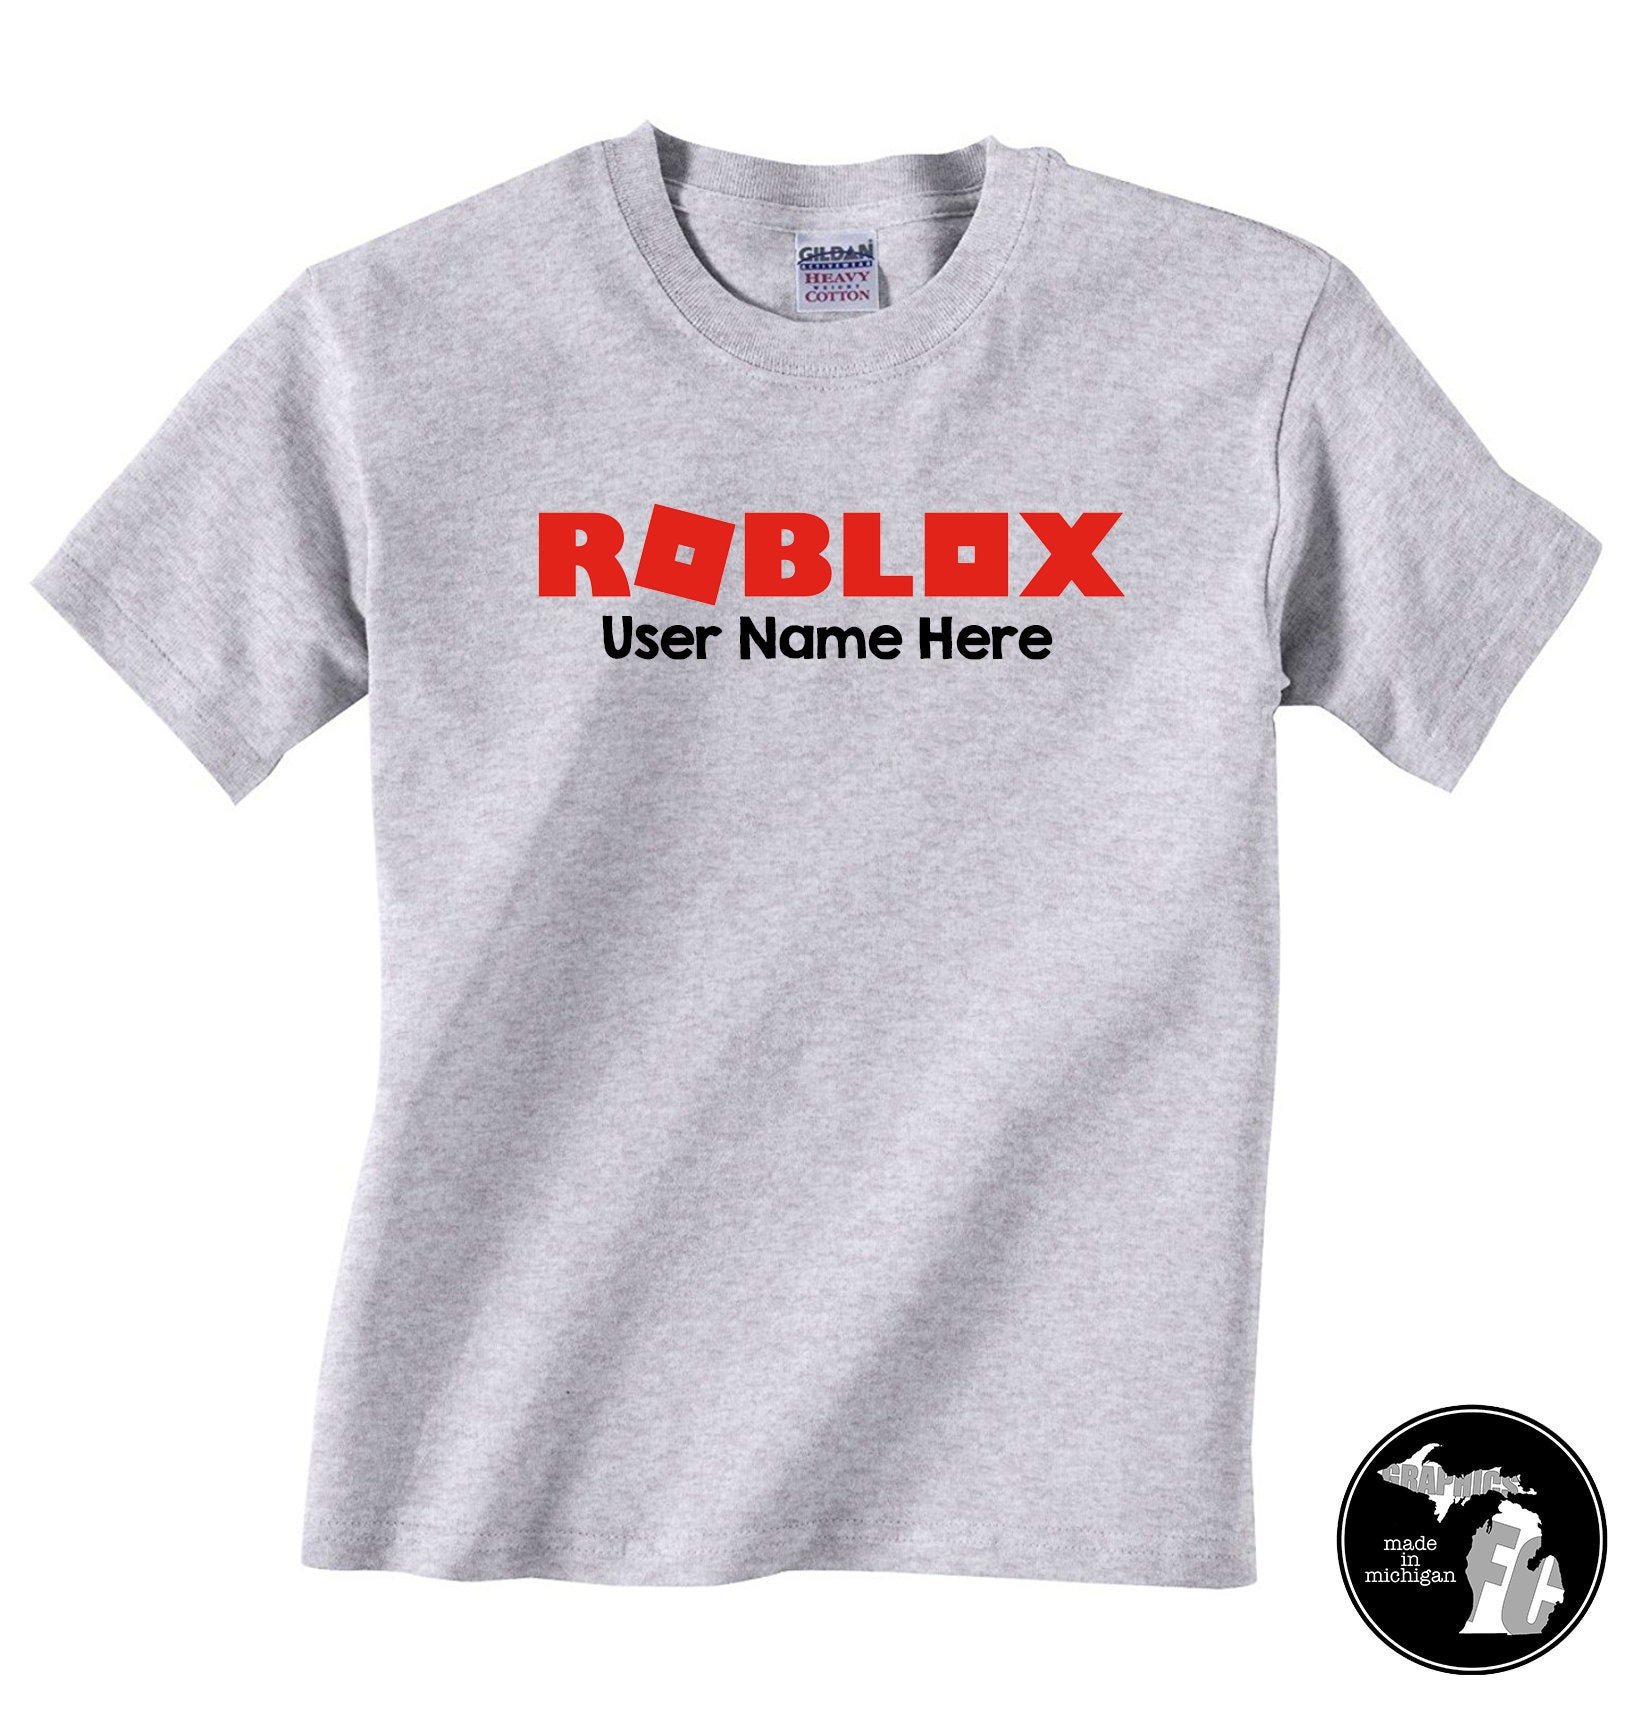 How To Create Shirts Roblox 2019 Coolmine Community School - august 2013 roblox news